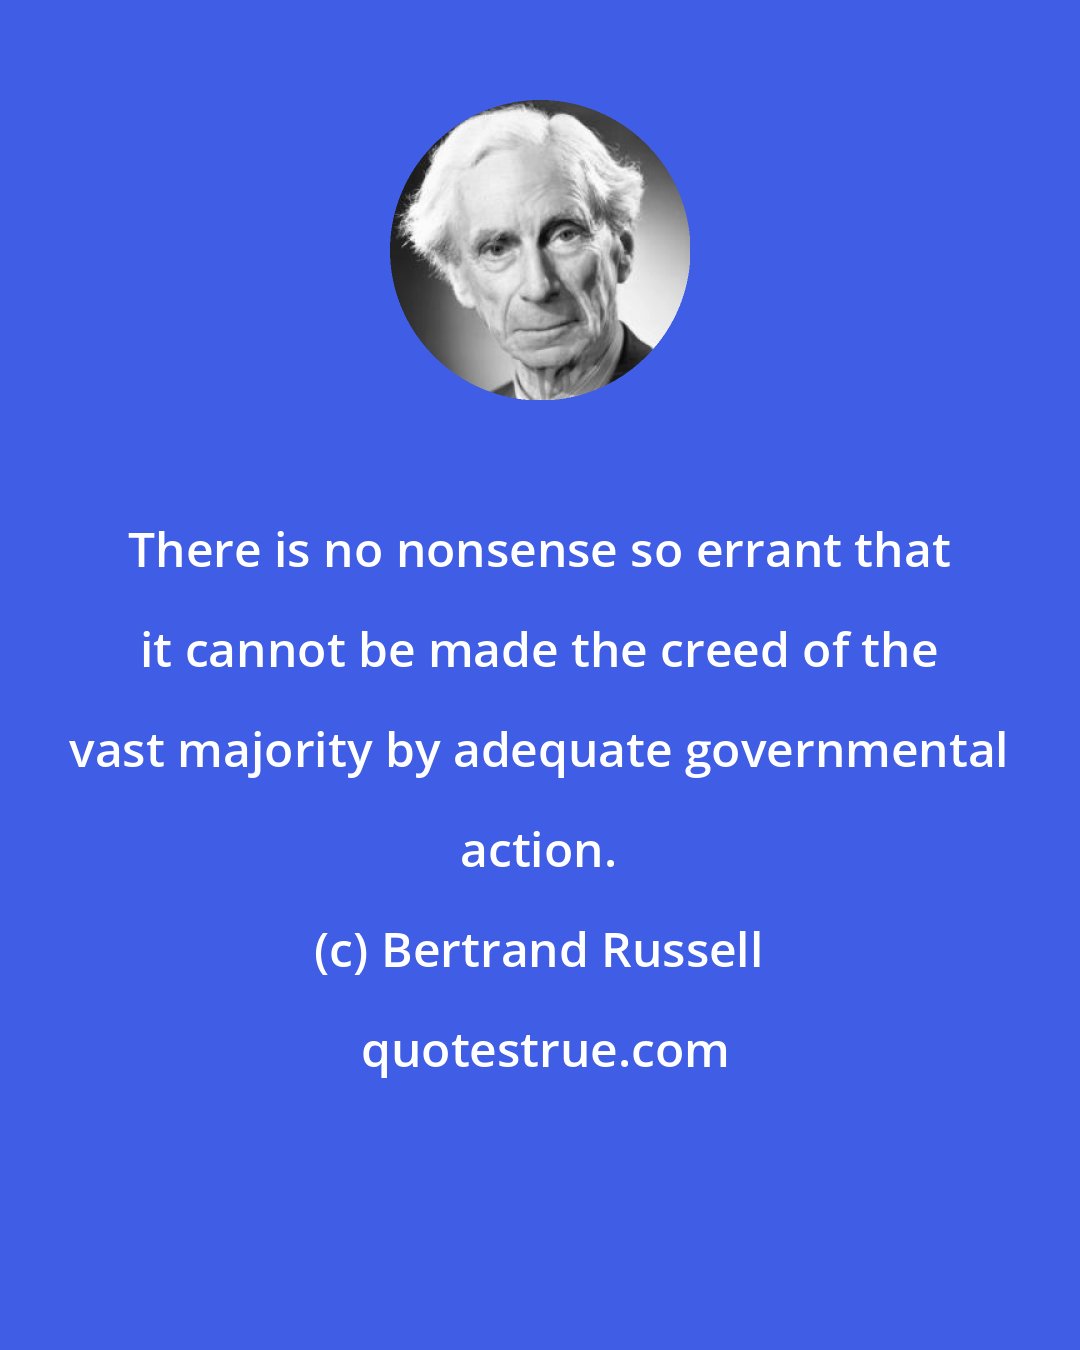 Bertrand Russell: There is no nonsense so errant that it cannot be made the creed of the vast majority by adequate governmental action.